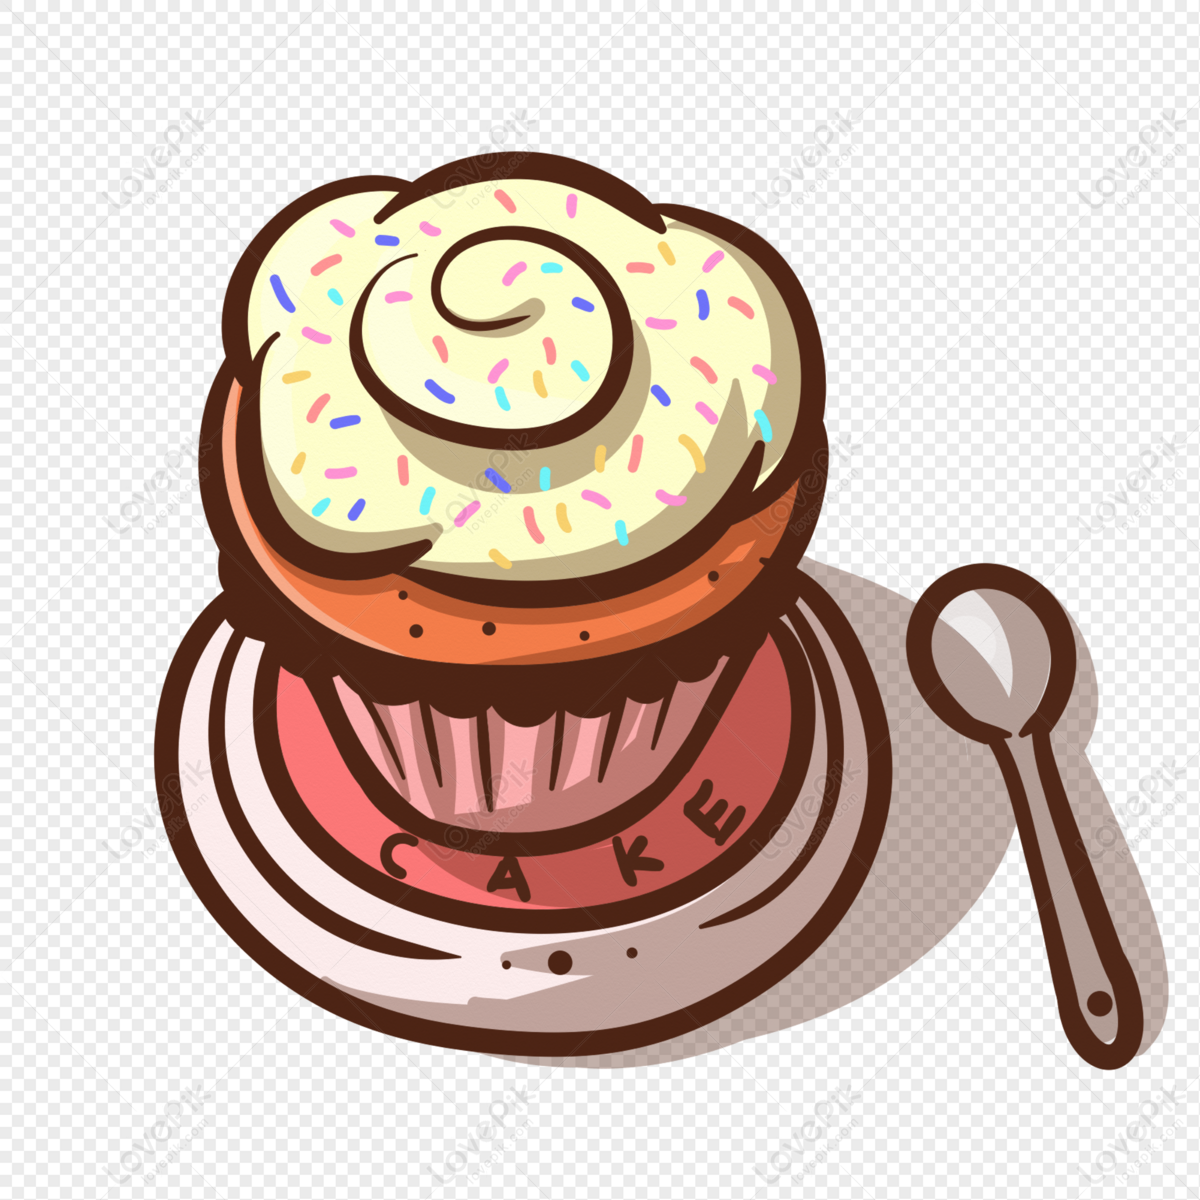 Cartoon Cake Material Free PNG White Transparent And Clipart Image For Free  Download - Lovepik | 400963452